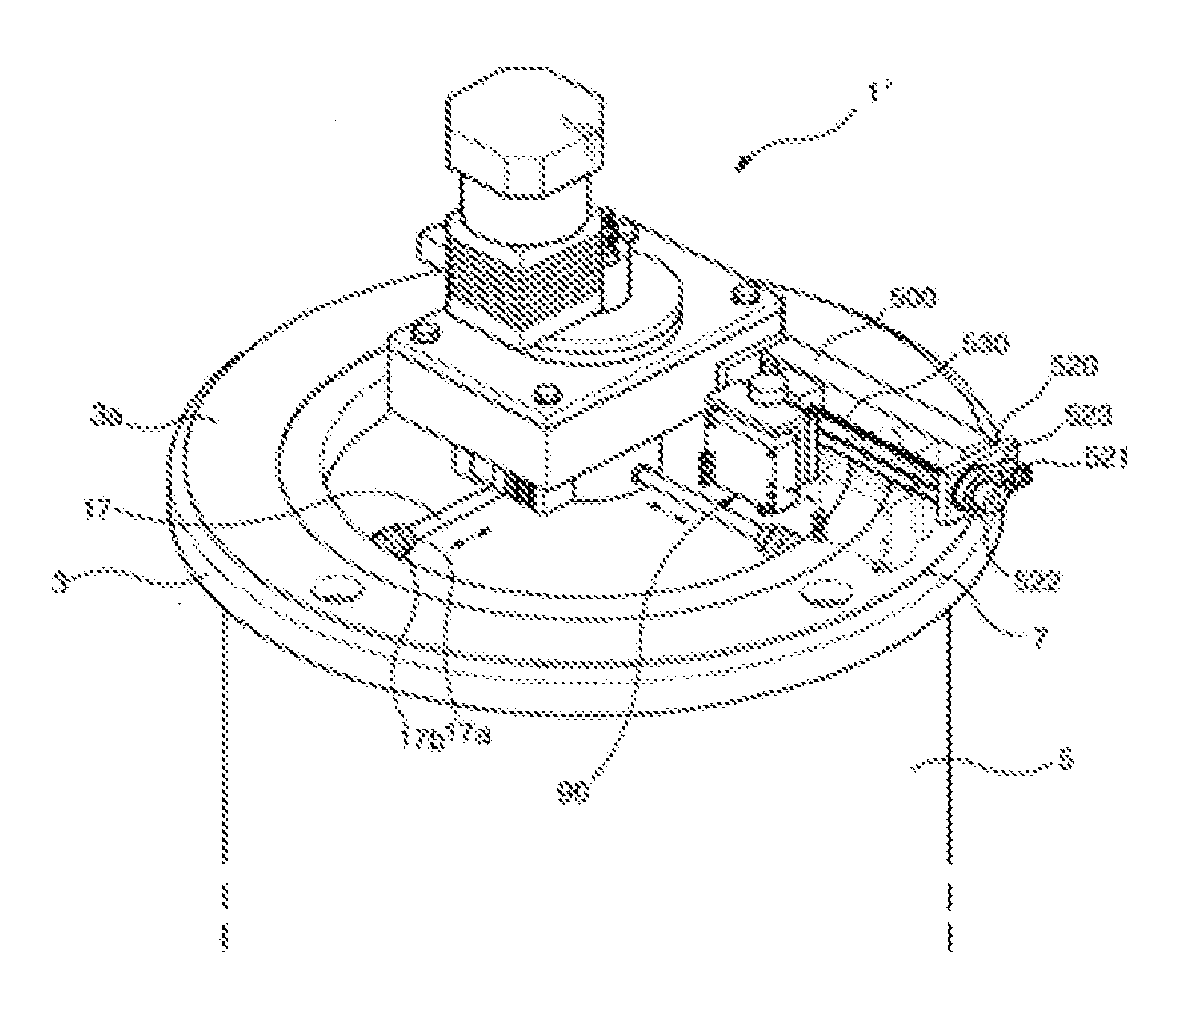 Automatic flange surface machining apparatus